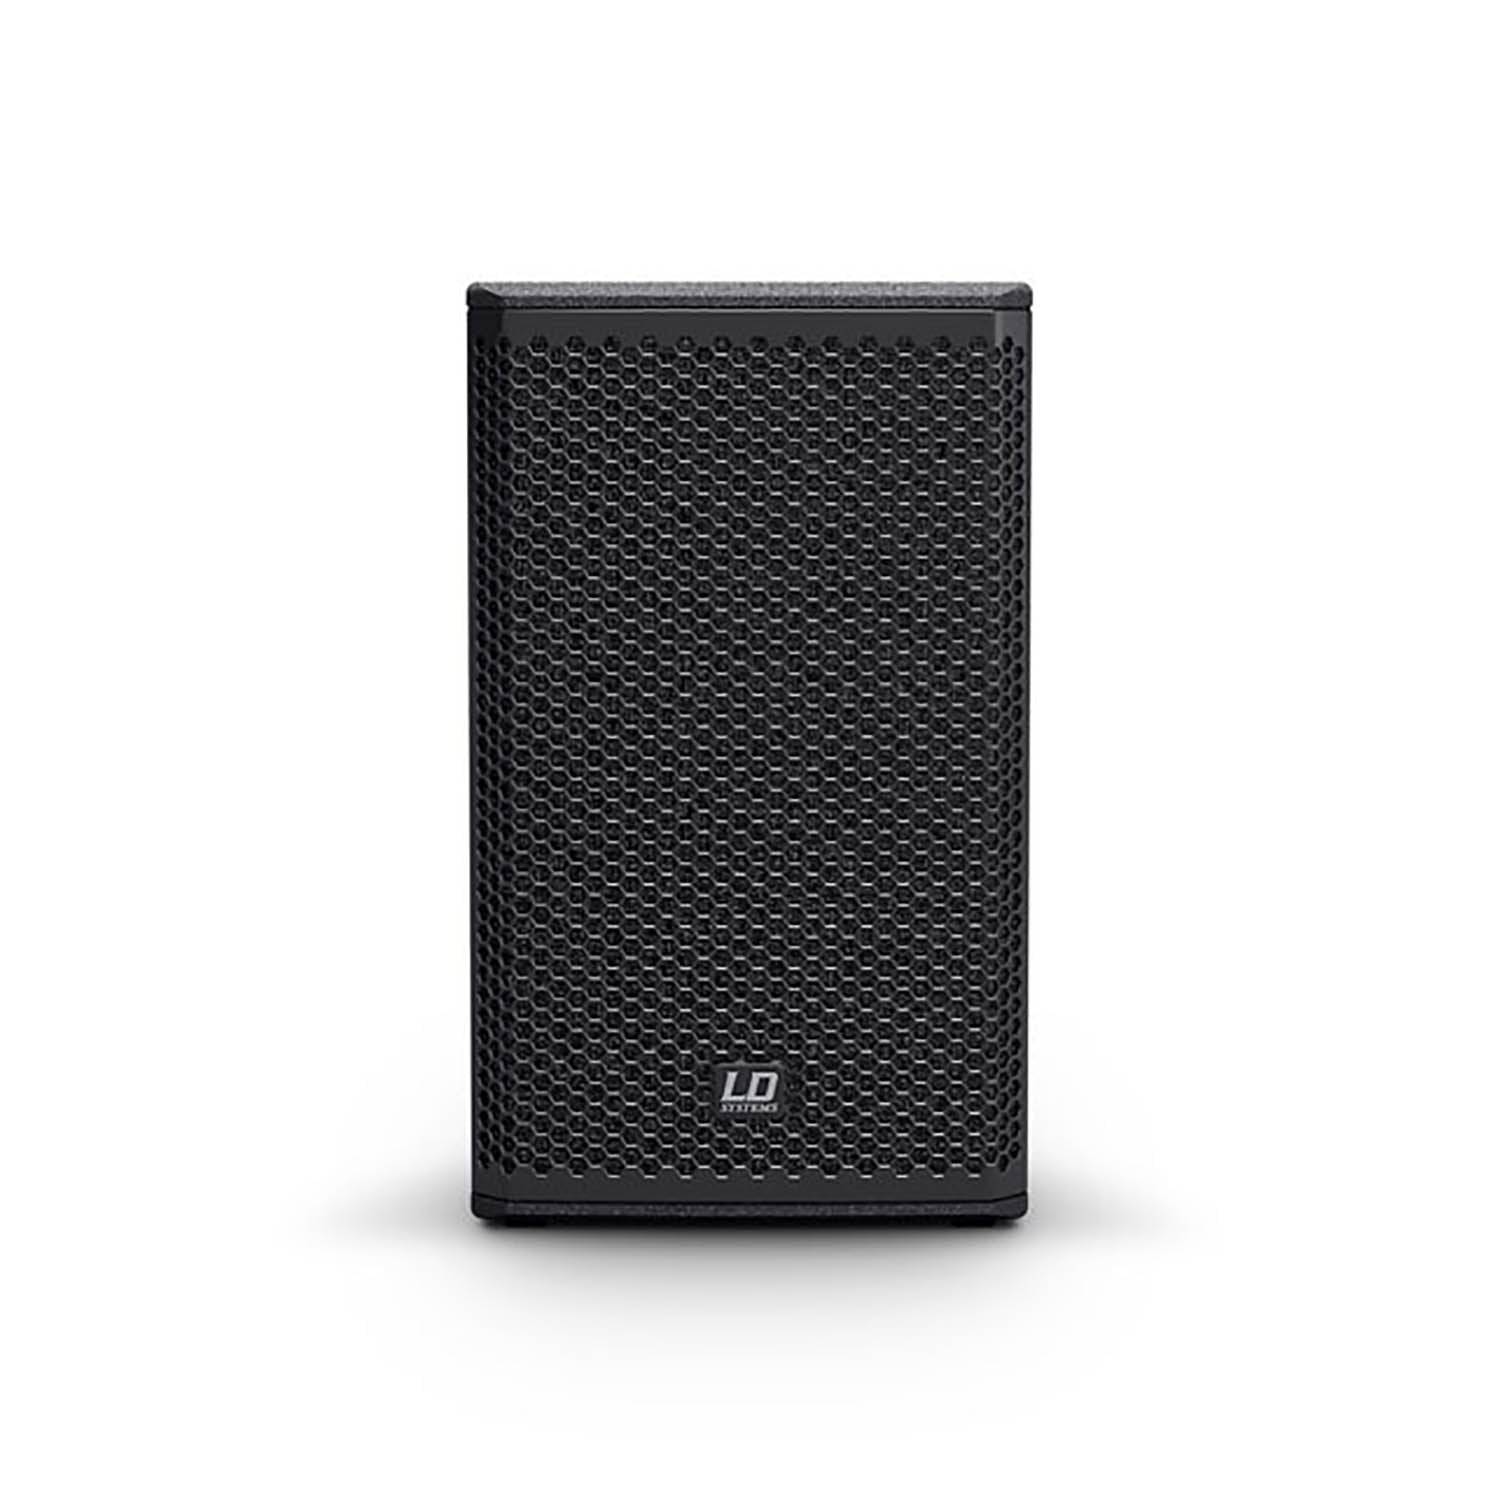 LD Systems STINGER 8 A G3, 2 Way Bass Reflex Active PA Speaker - 8 Inches - Hollywood DJ